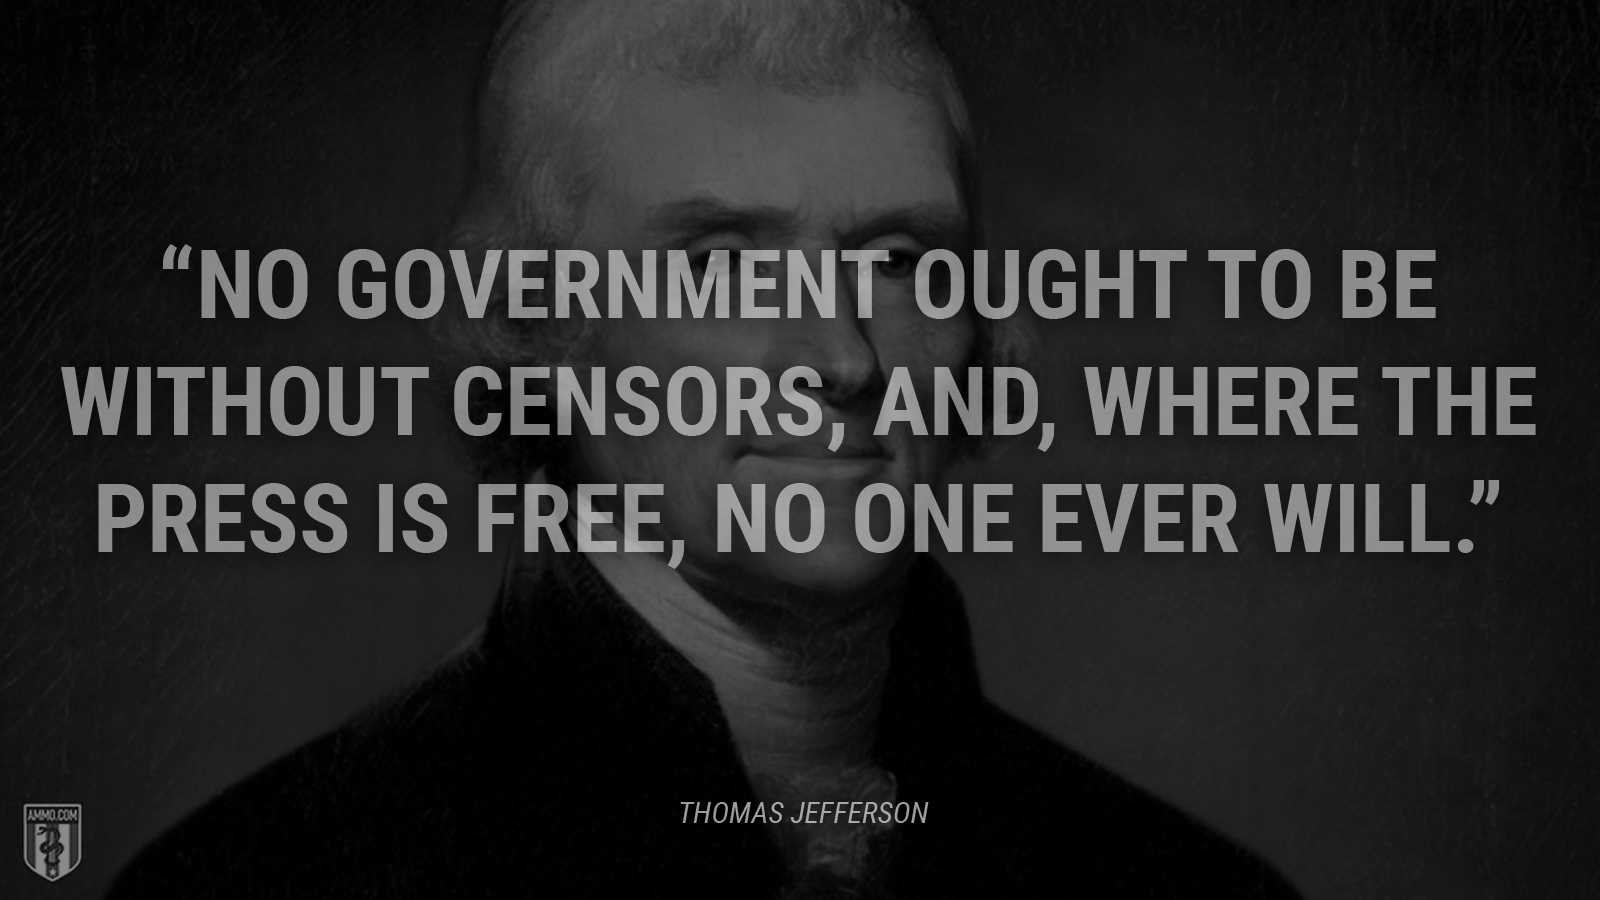 “No government ought to be without censors, and, where the press is free, no one ever will.” - Thomas Jefferson